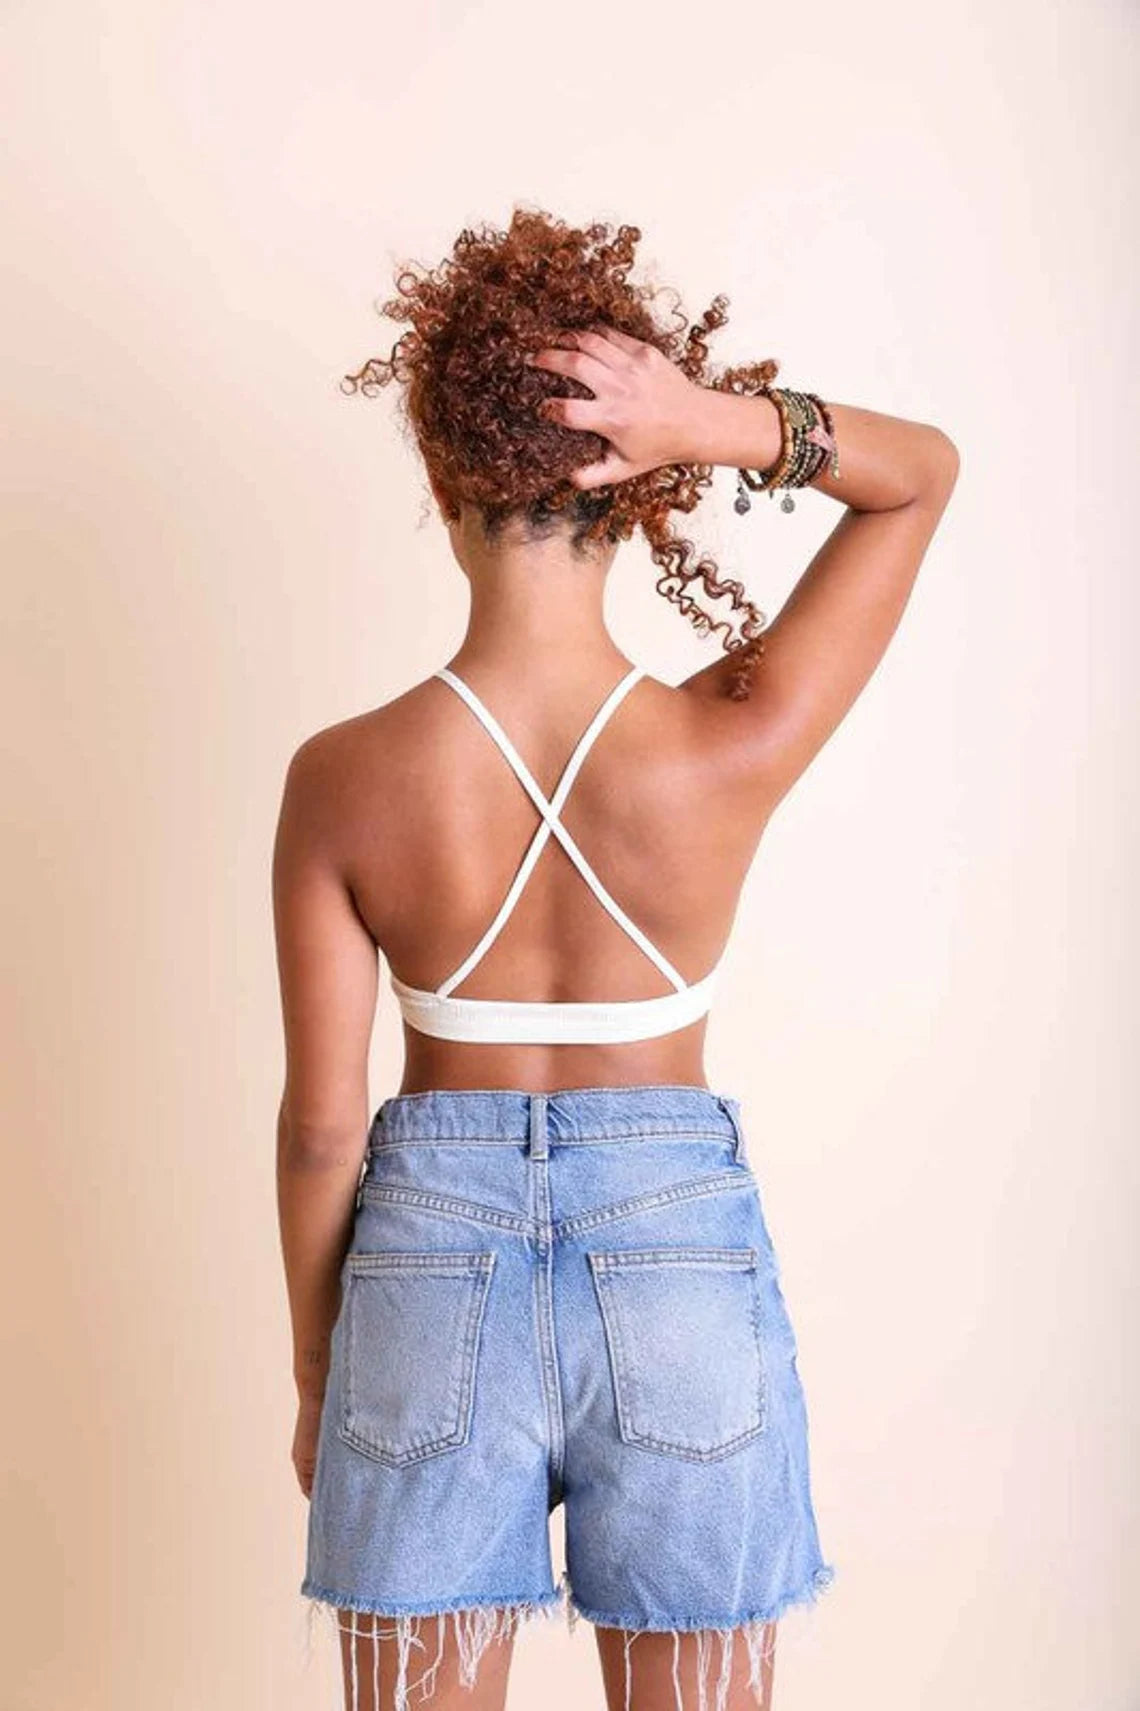 Crochet Lace High Neck Bralette with a boho bohemian vibe and criss cross x back feature. incredibly soft fabric and superior stretch. Available in 2 colors: black or ivory cream white